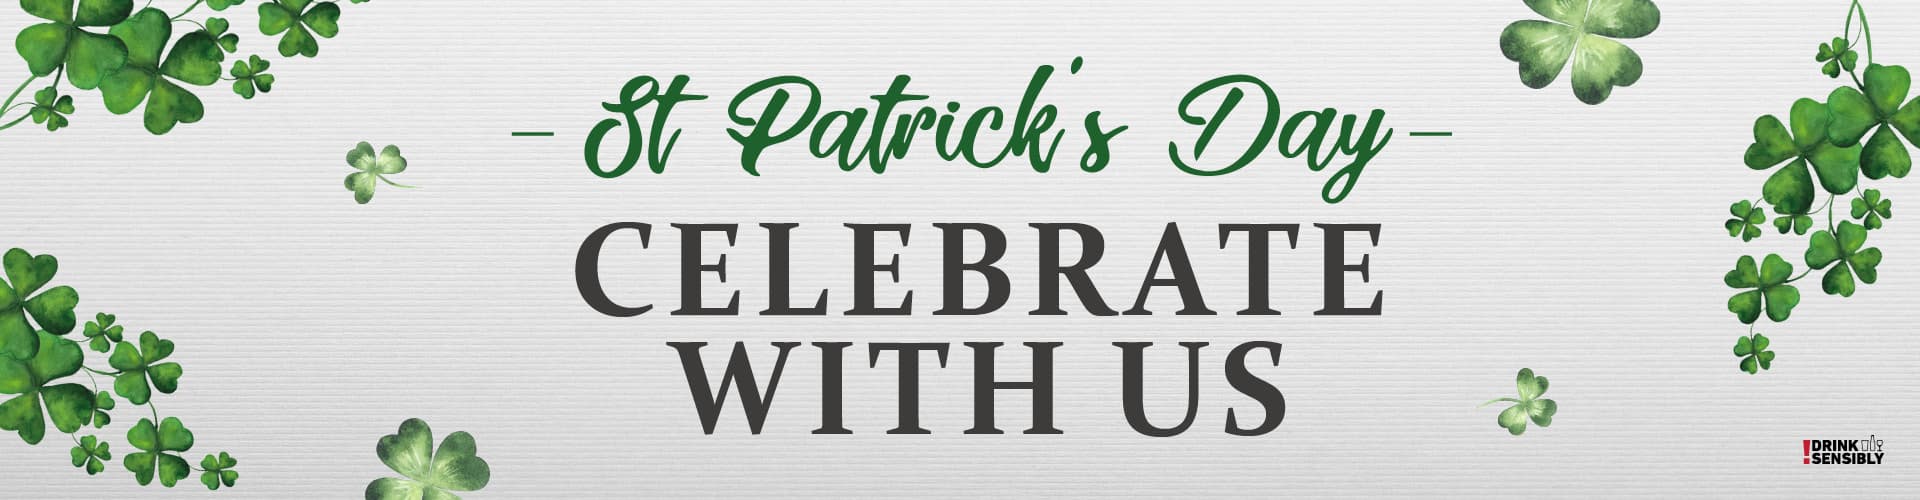 Celebrate St Patrick's Day in Linlithgow